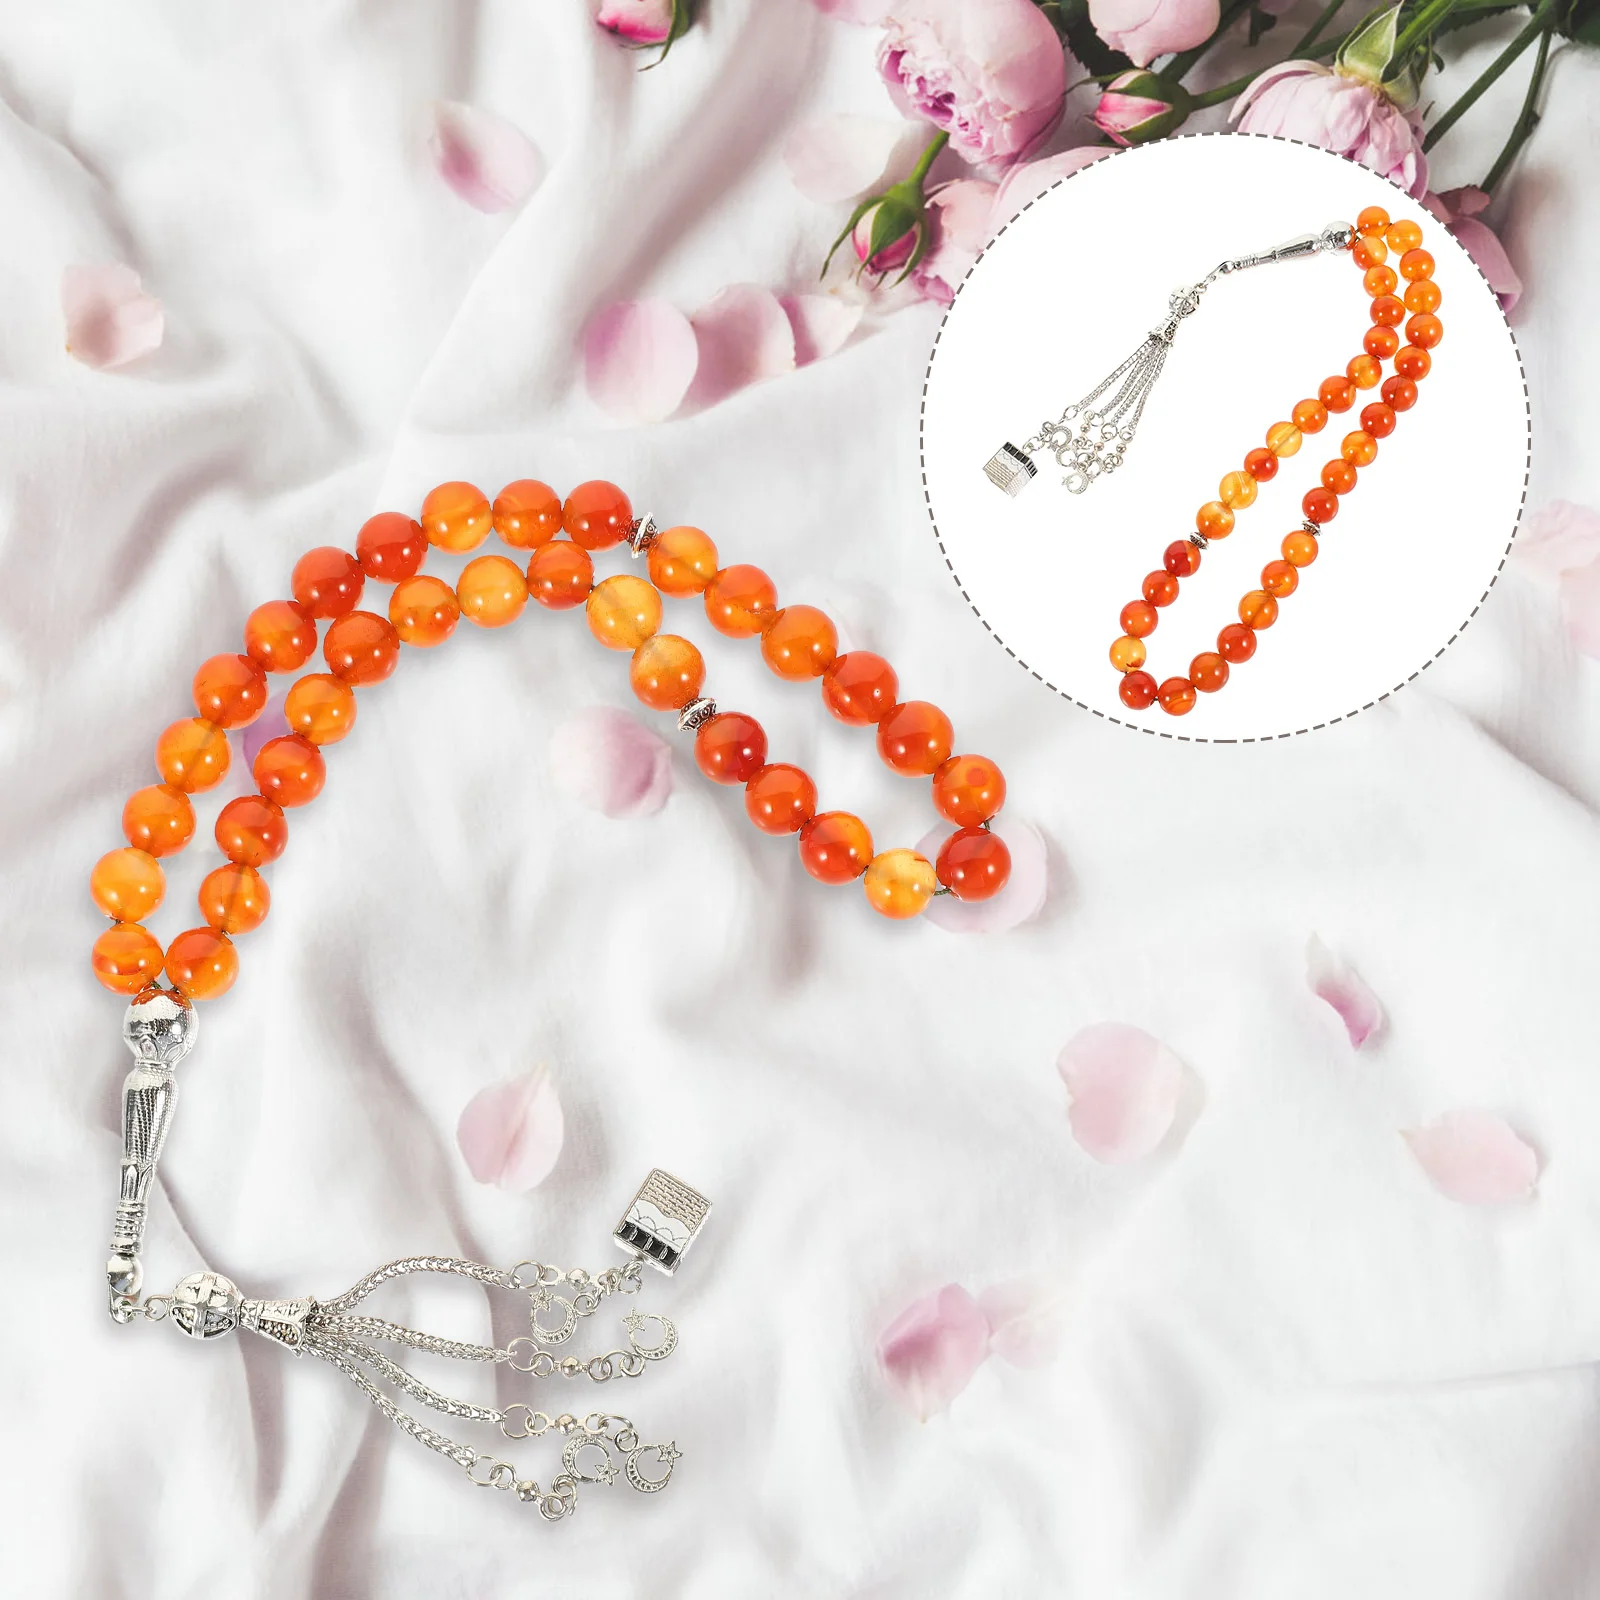 

Agate Bead Bracelet Dainty Bracelets Beads Chain Worry Round Prayer Rosary Necklace Ornament Tasbih Miss Delicate